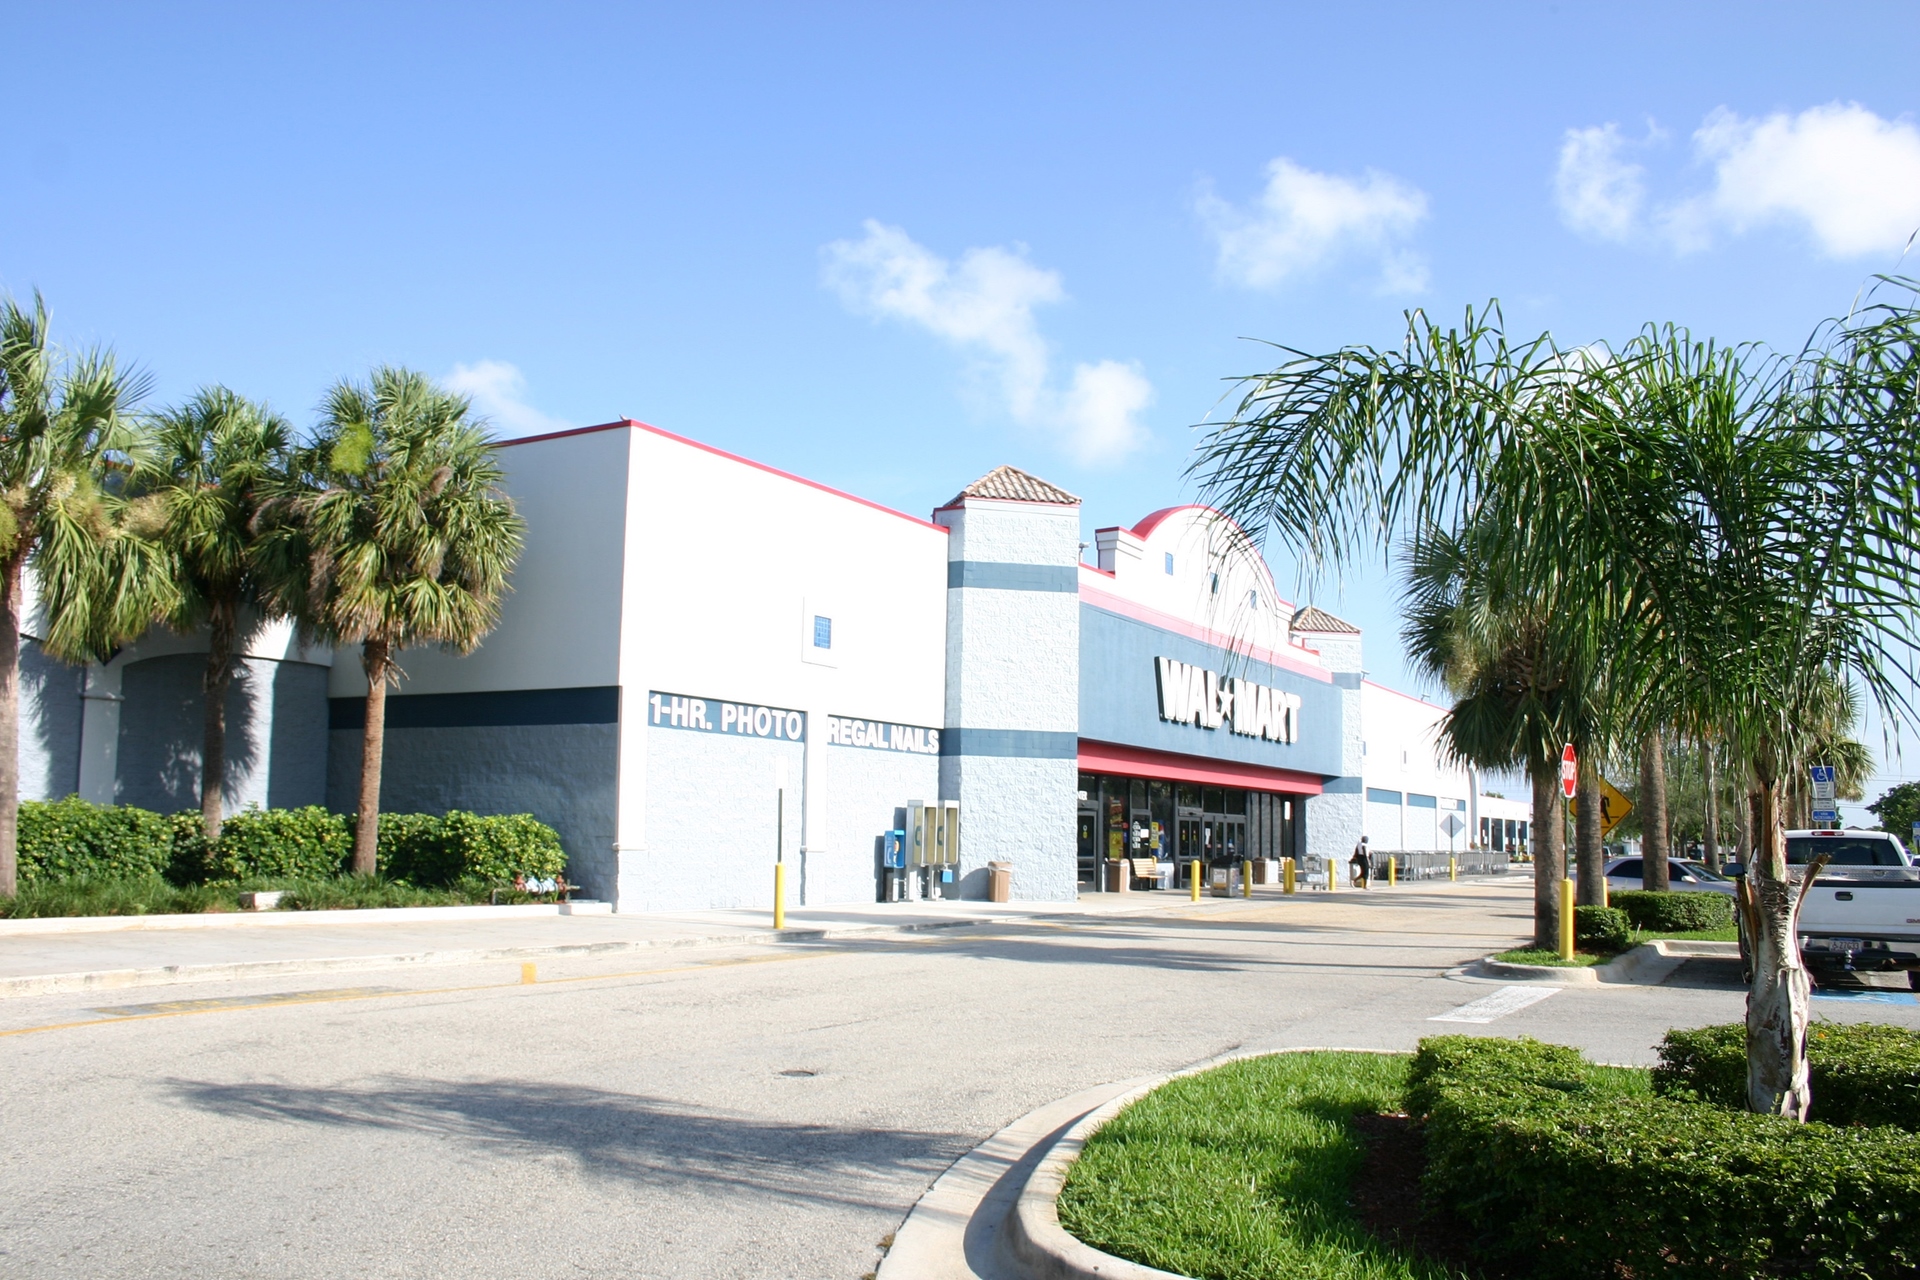 The former Walmart building at 7300 West McNab Road in North Lauderdale